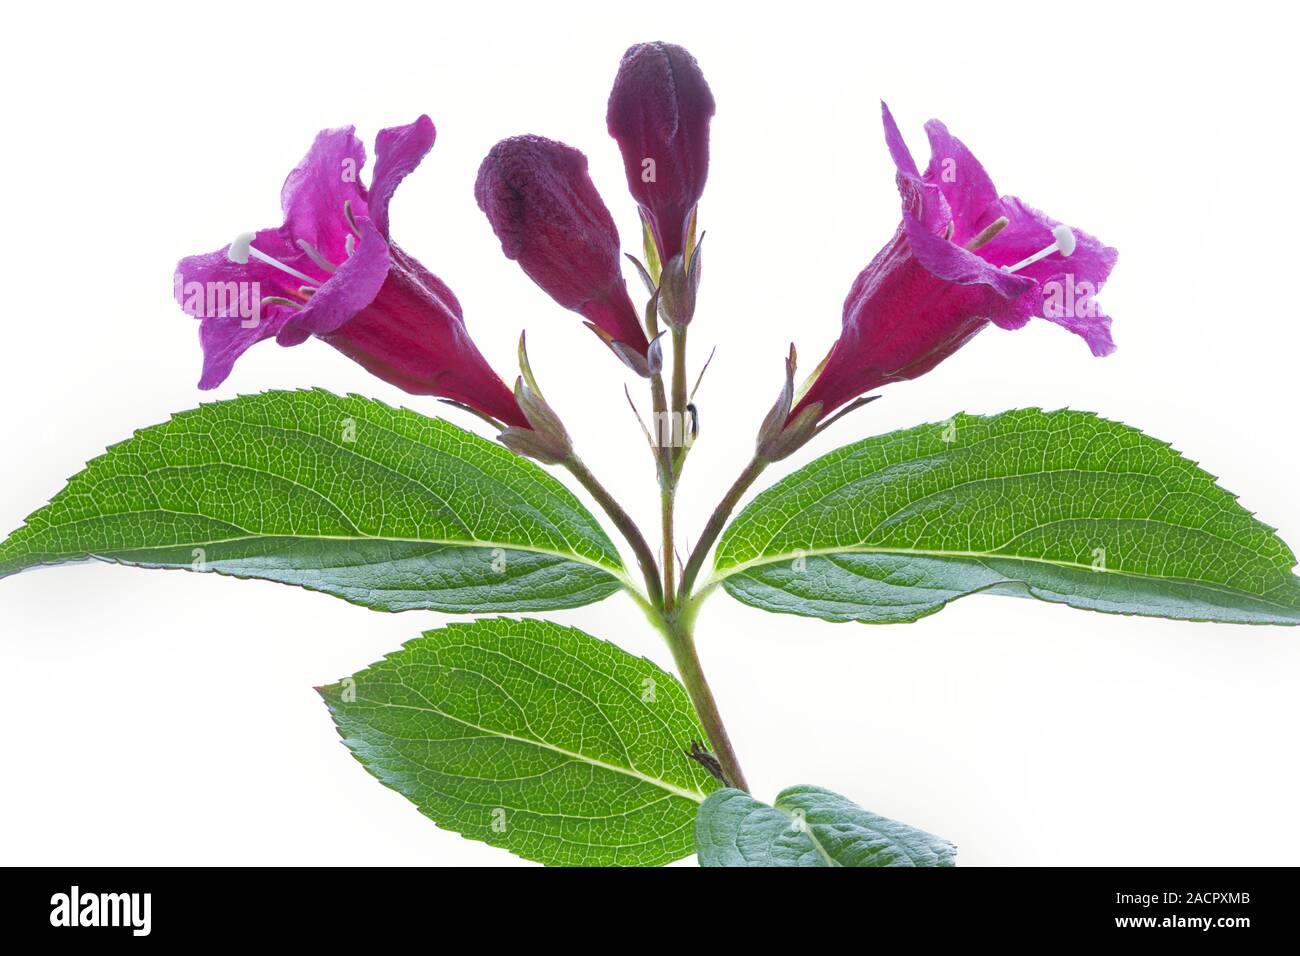 Flower of a Weigelie (Weigela) on a white background Stock Photo